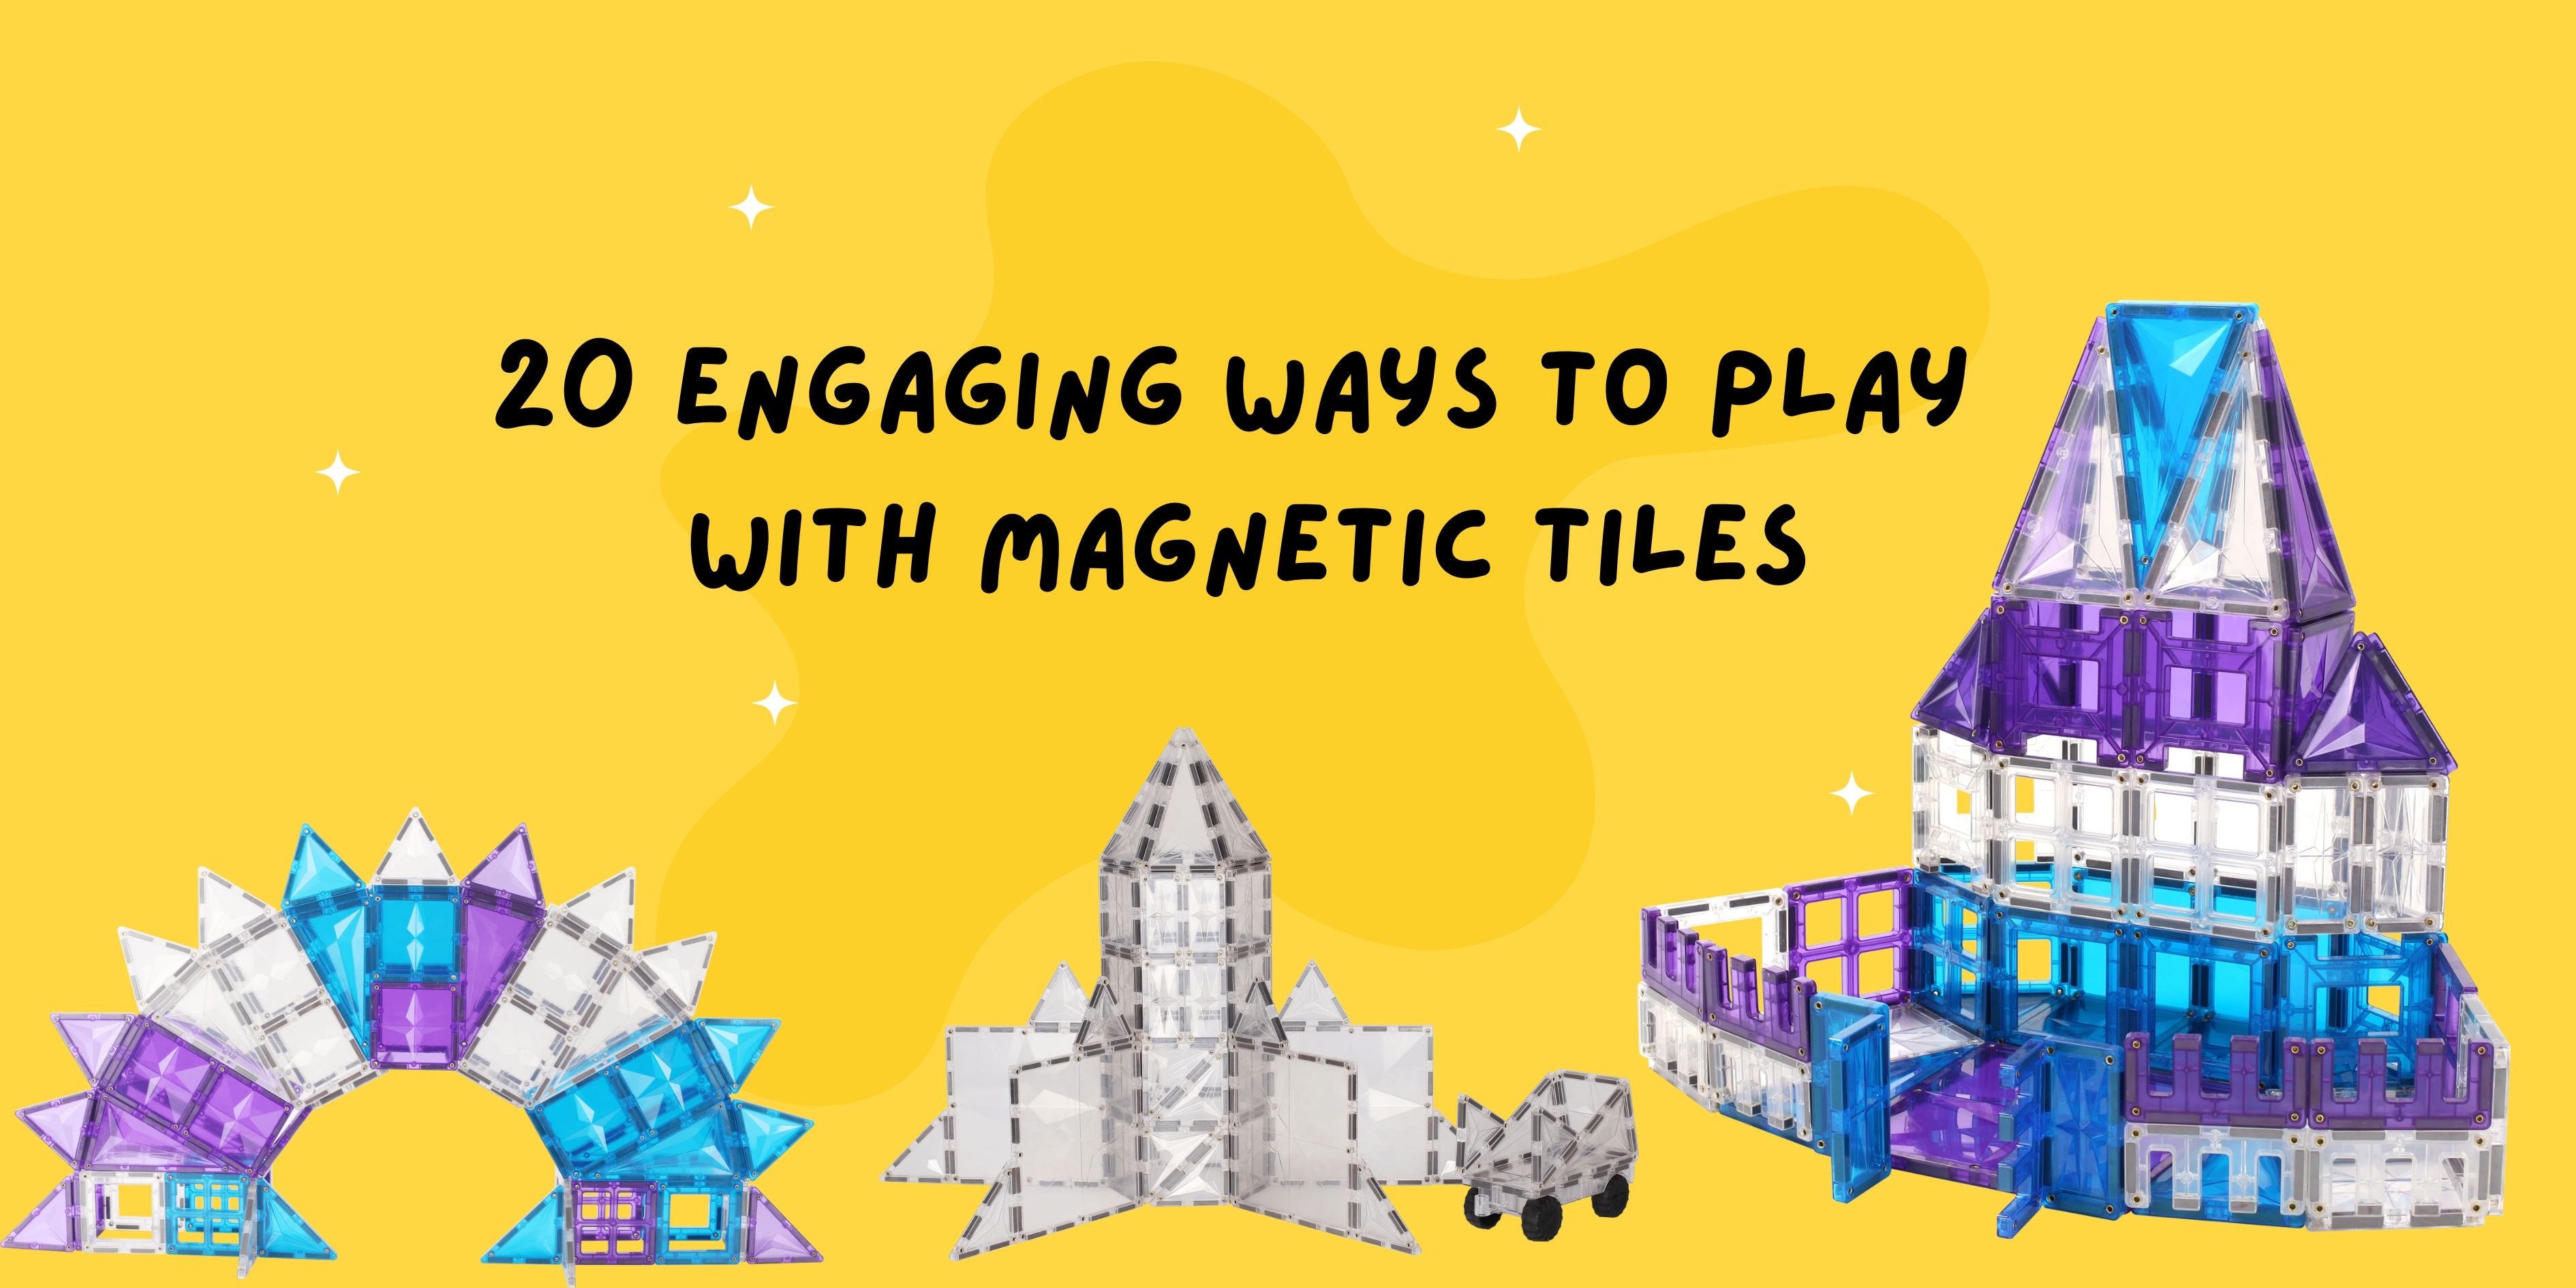 20 Engaging Ways to Play with Magnetic Tiles for Imaginative Kids